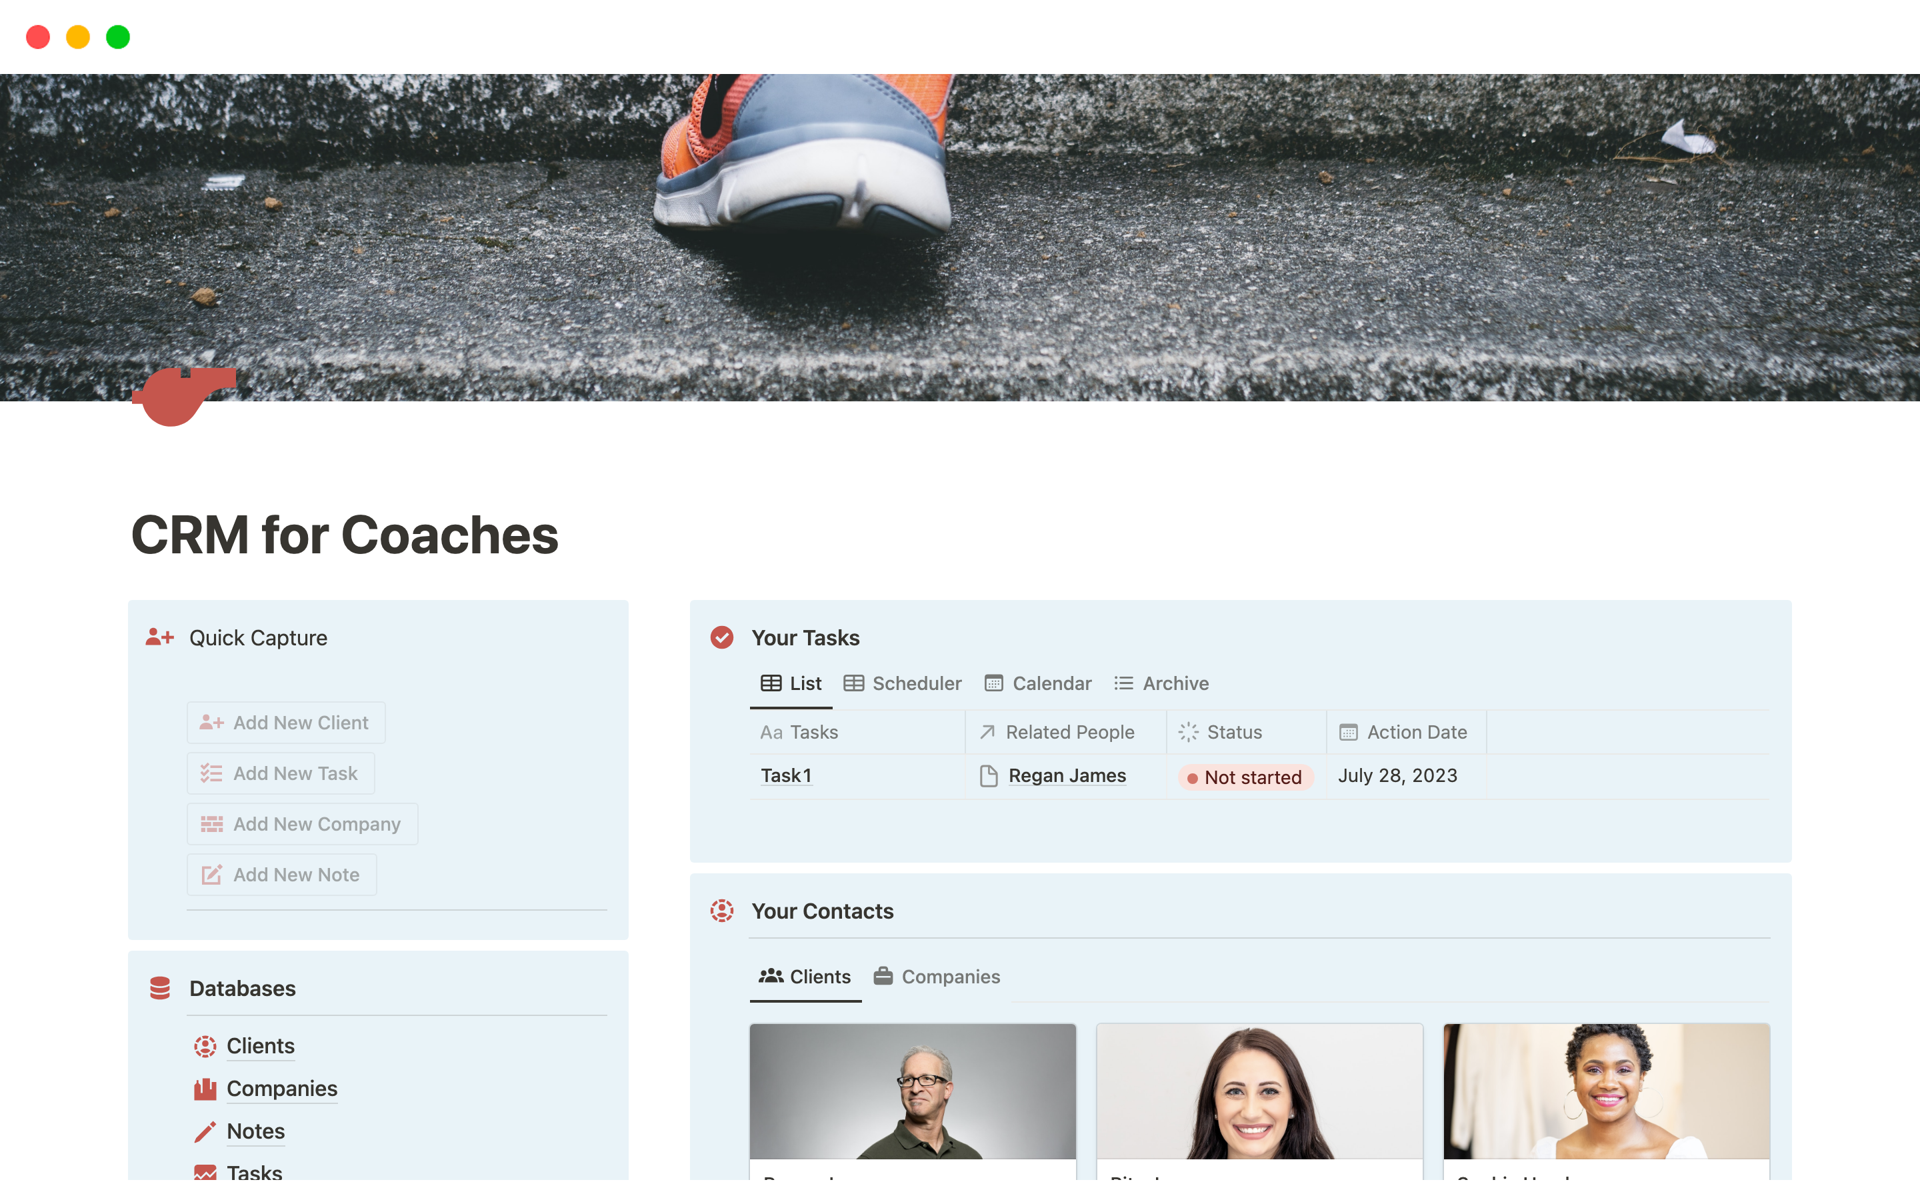 Helps Coaches to keep track of their Clients